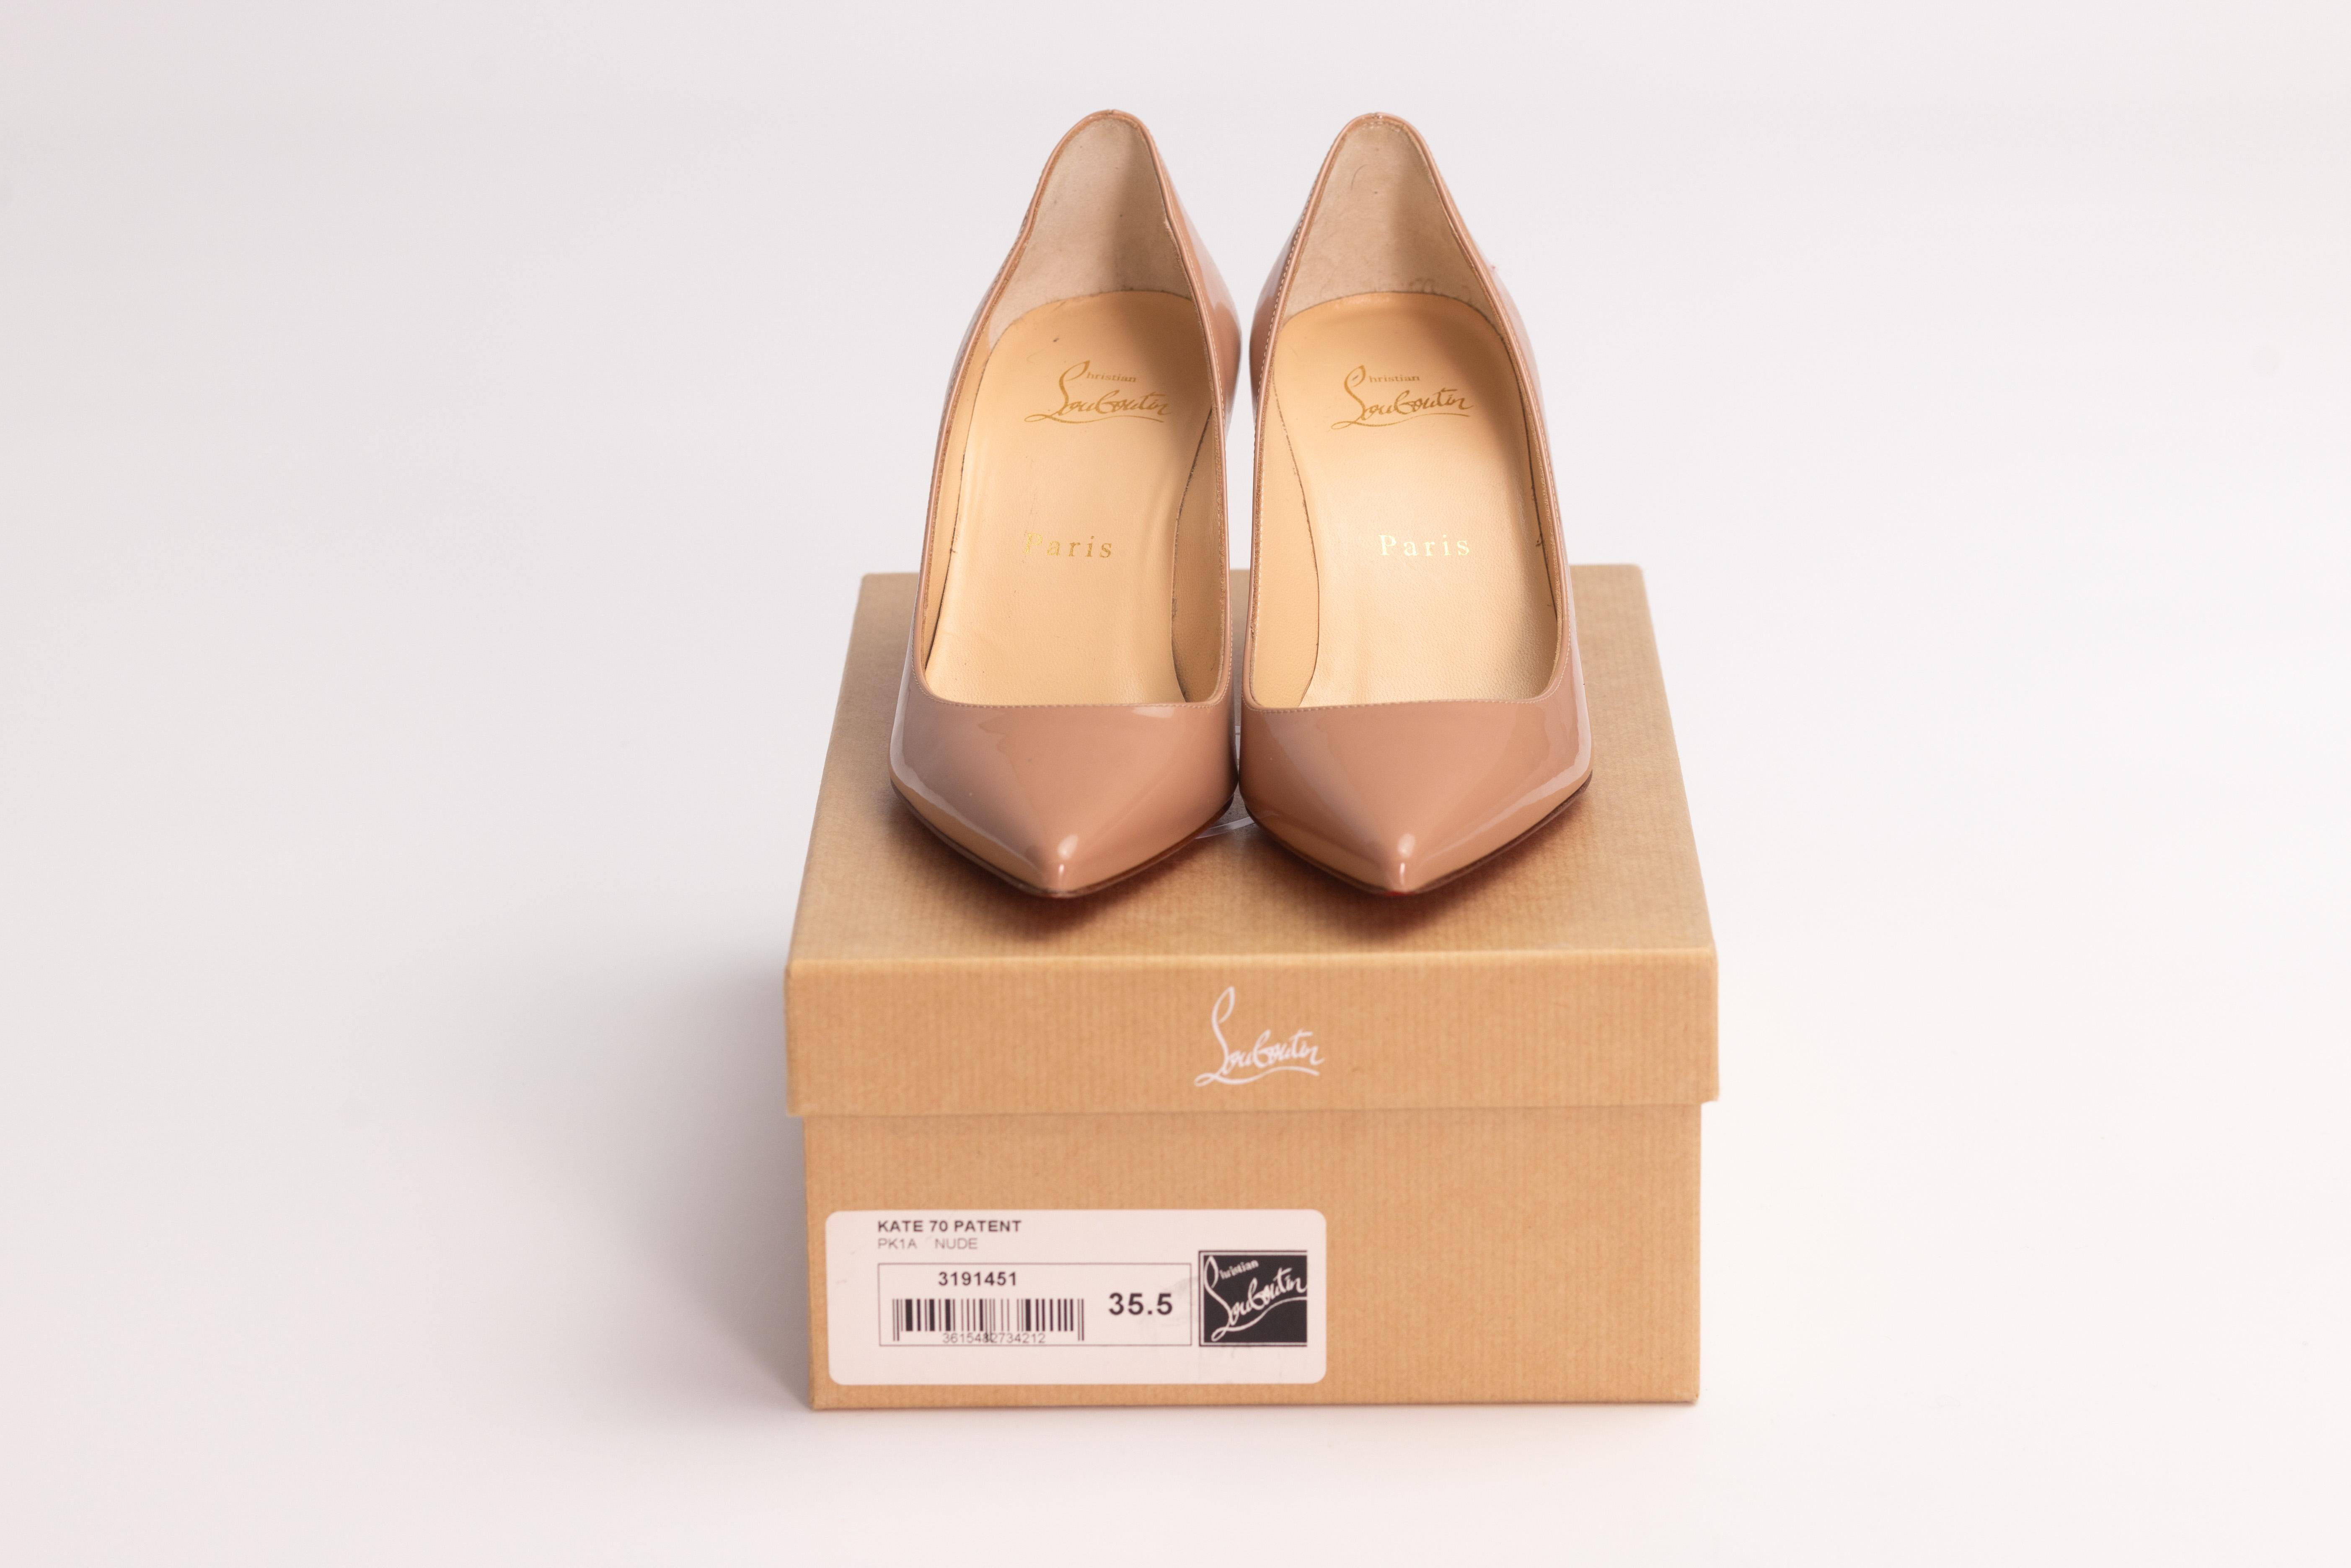 Christian Louboutin Beige Patent Pigalle Pointed Toe Heels (EU 35.5) For Sale 3